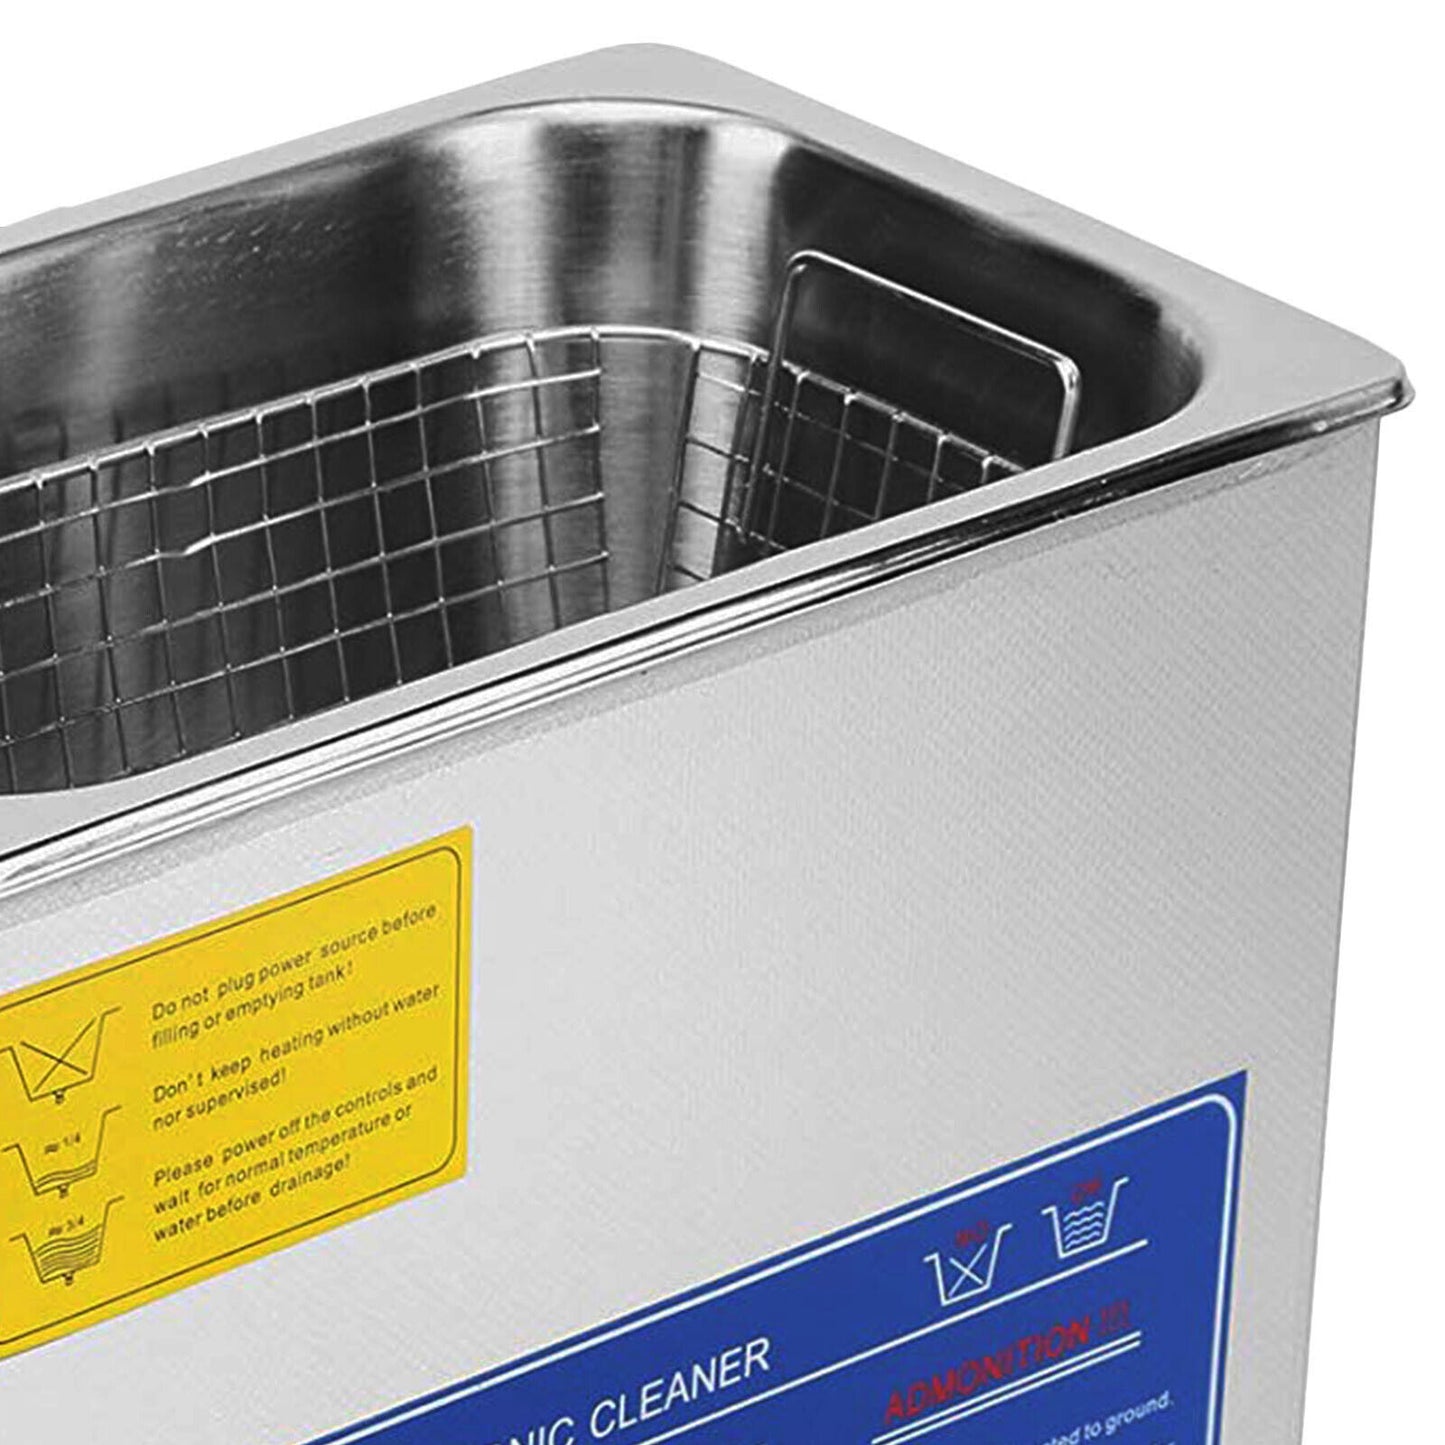 New 6L Ultrasonic Cleaner Stainless Steel Industry Heated Heater w/Timer